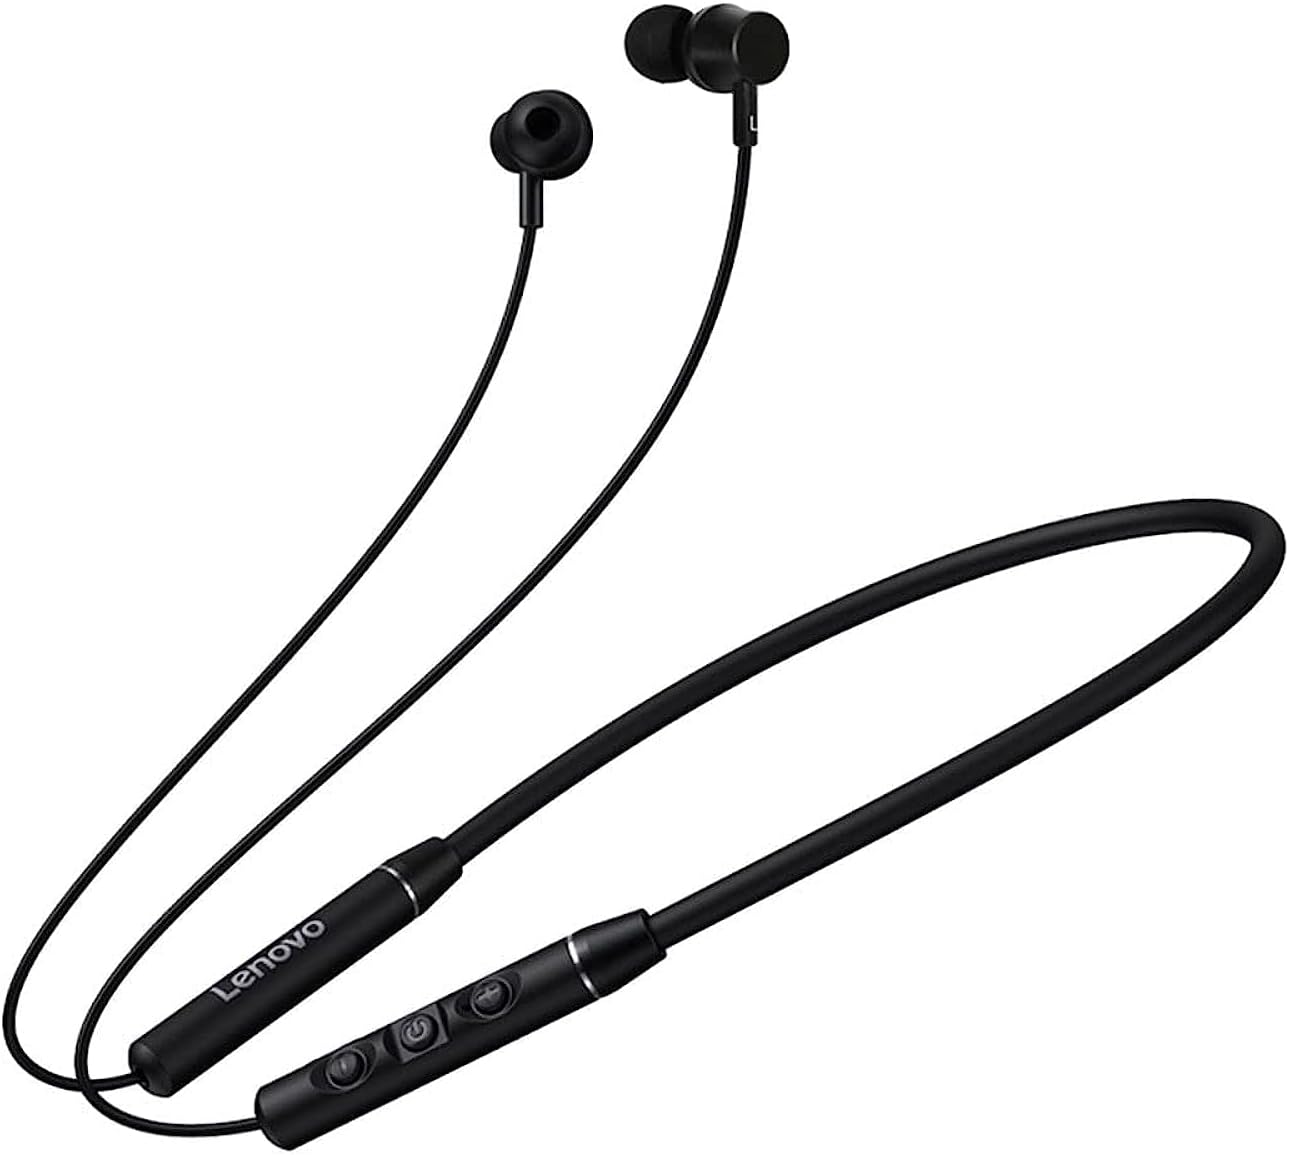 Lenovo In-Ear Wireless Magnetic Earphones with Microphone, Black- QE03